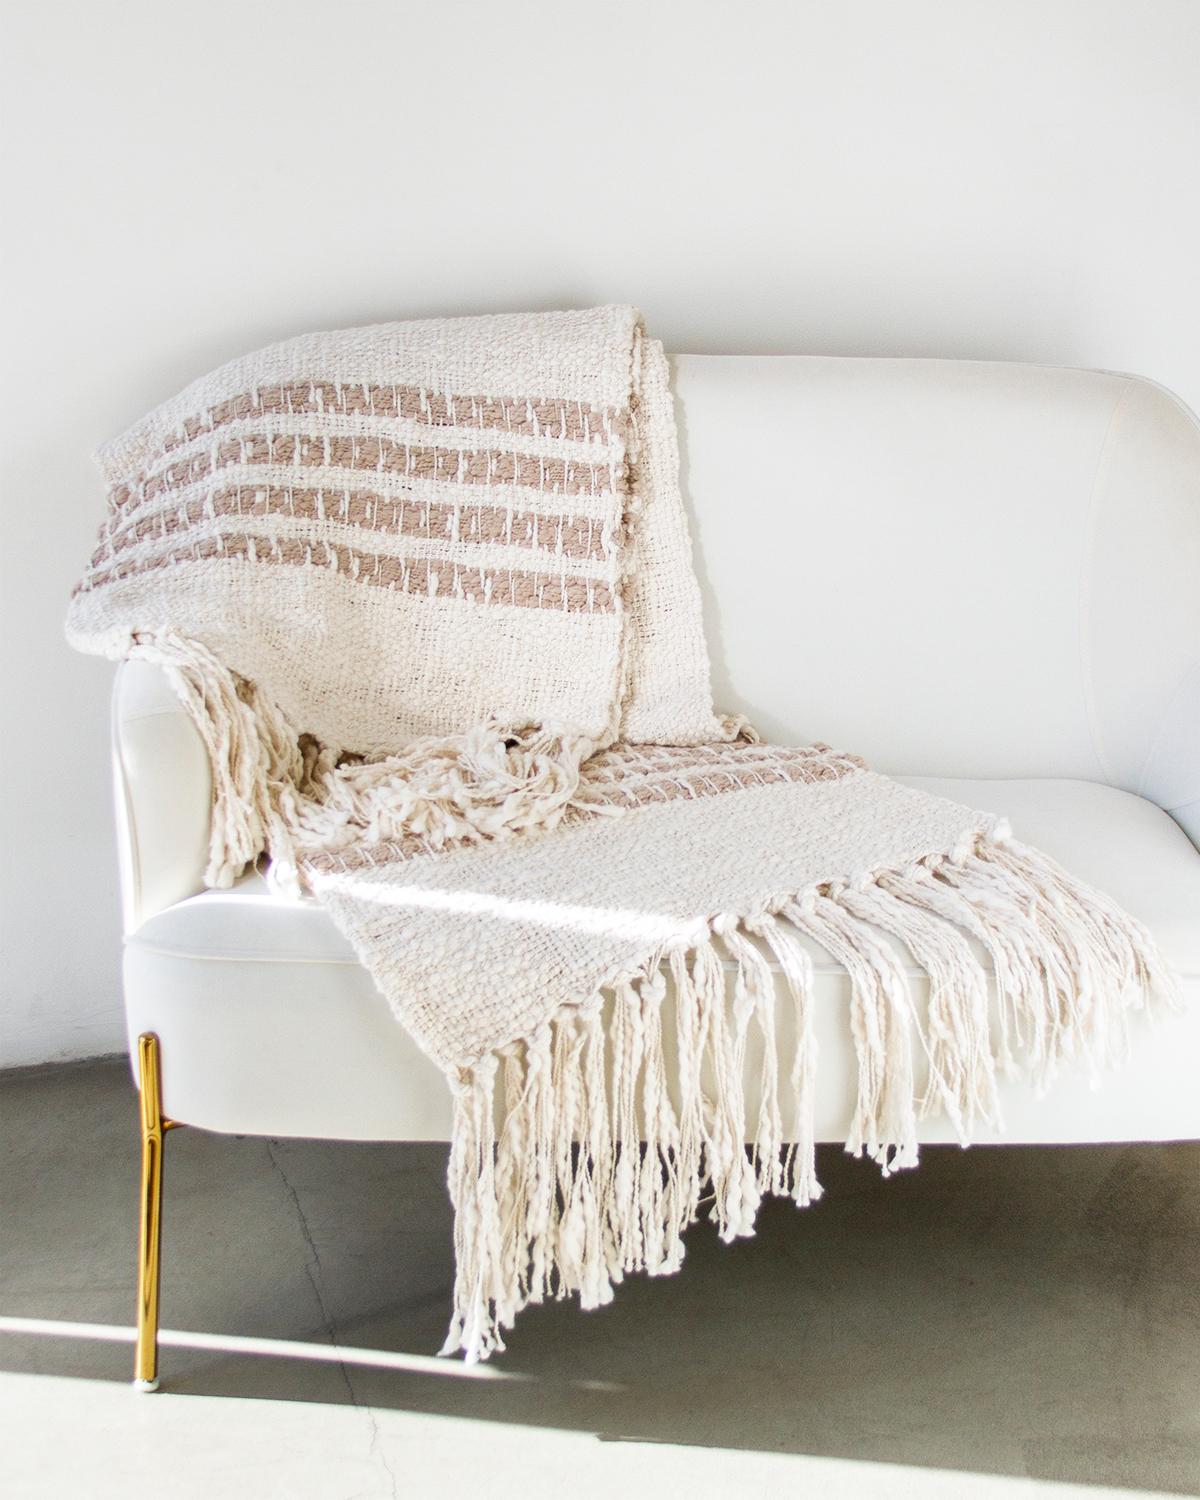 Elevate your home decor with the sophisticated and rustic Miel Ivory Cotton Throw Blanket. Crafted with a soft boucle cotton weave and adorned with stripe detailing, this blanket adds a touch of quiet luxury to any space. The open weave weft and